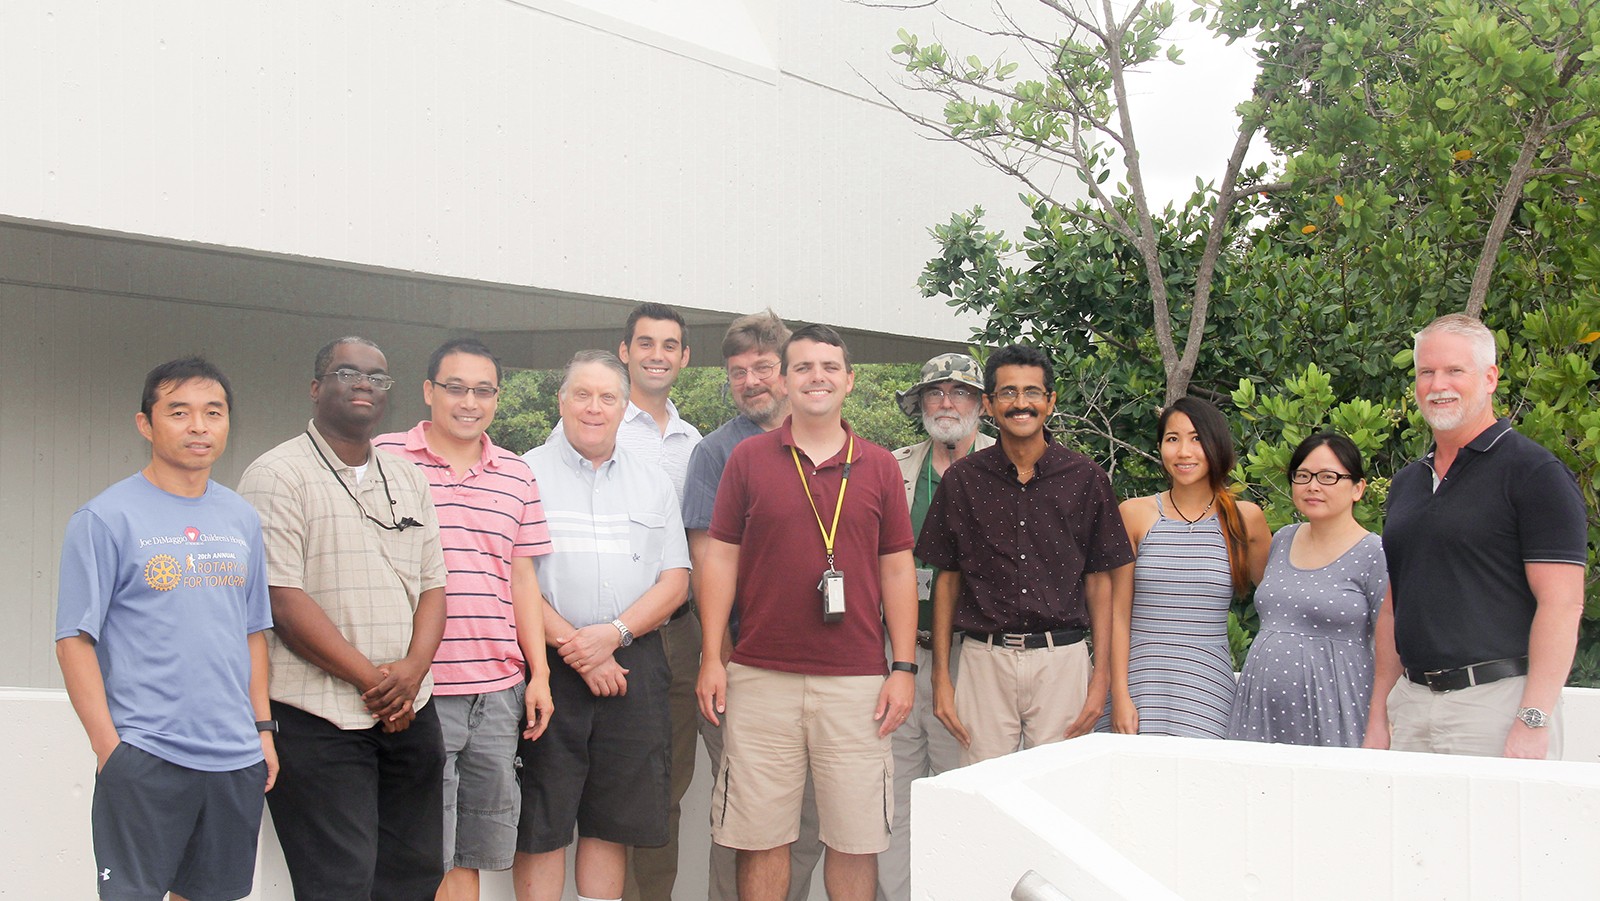 Group photo of AOML's hurricane model scientists. Image Credit: NOAA AOML.